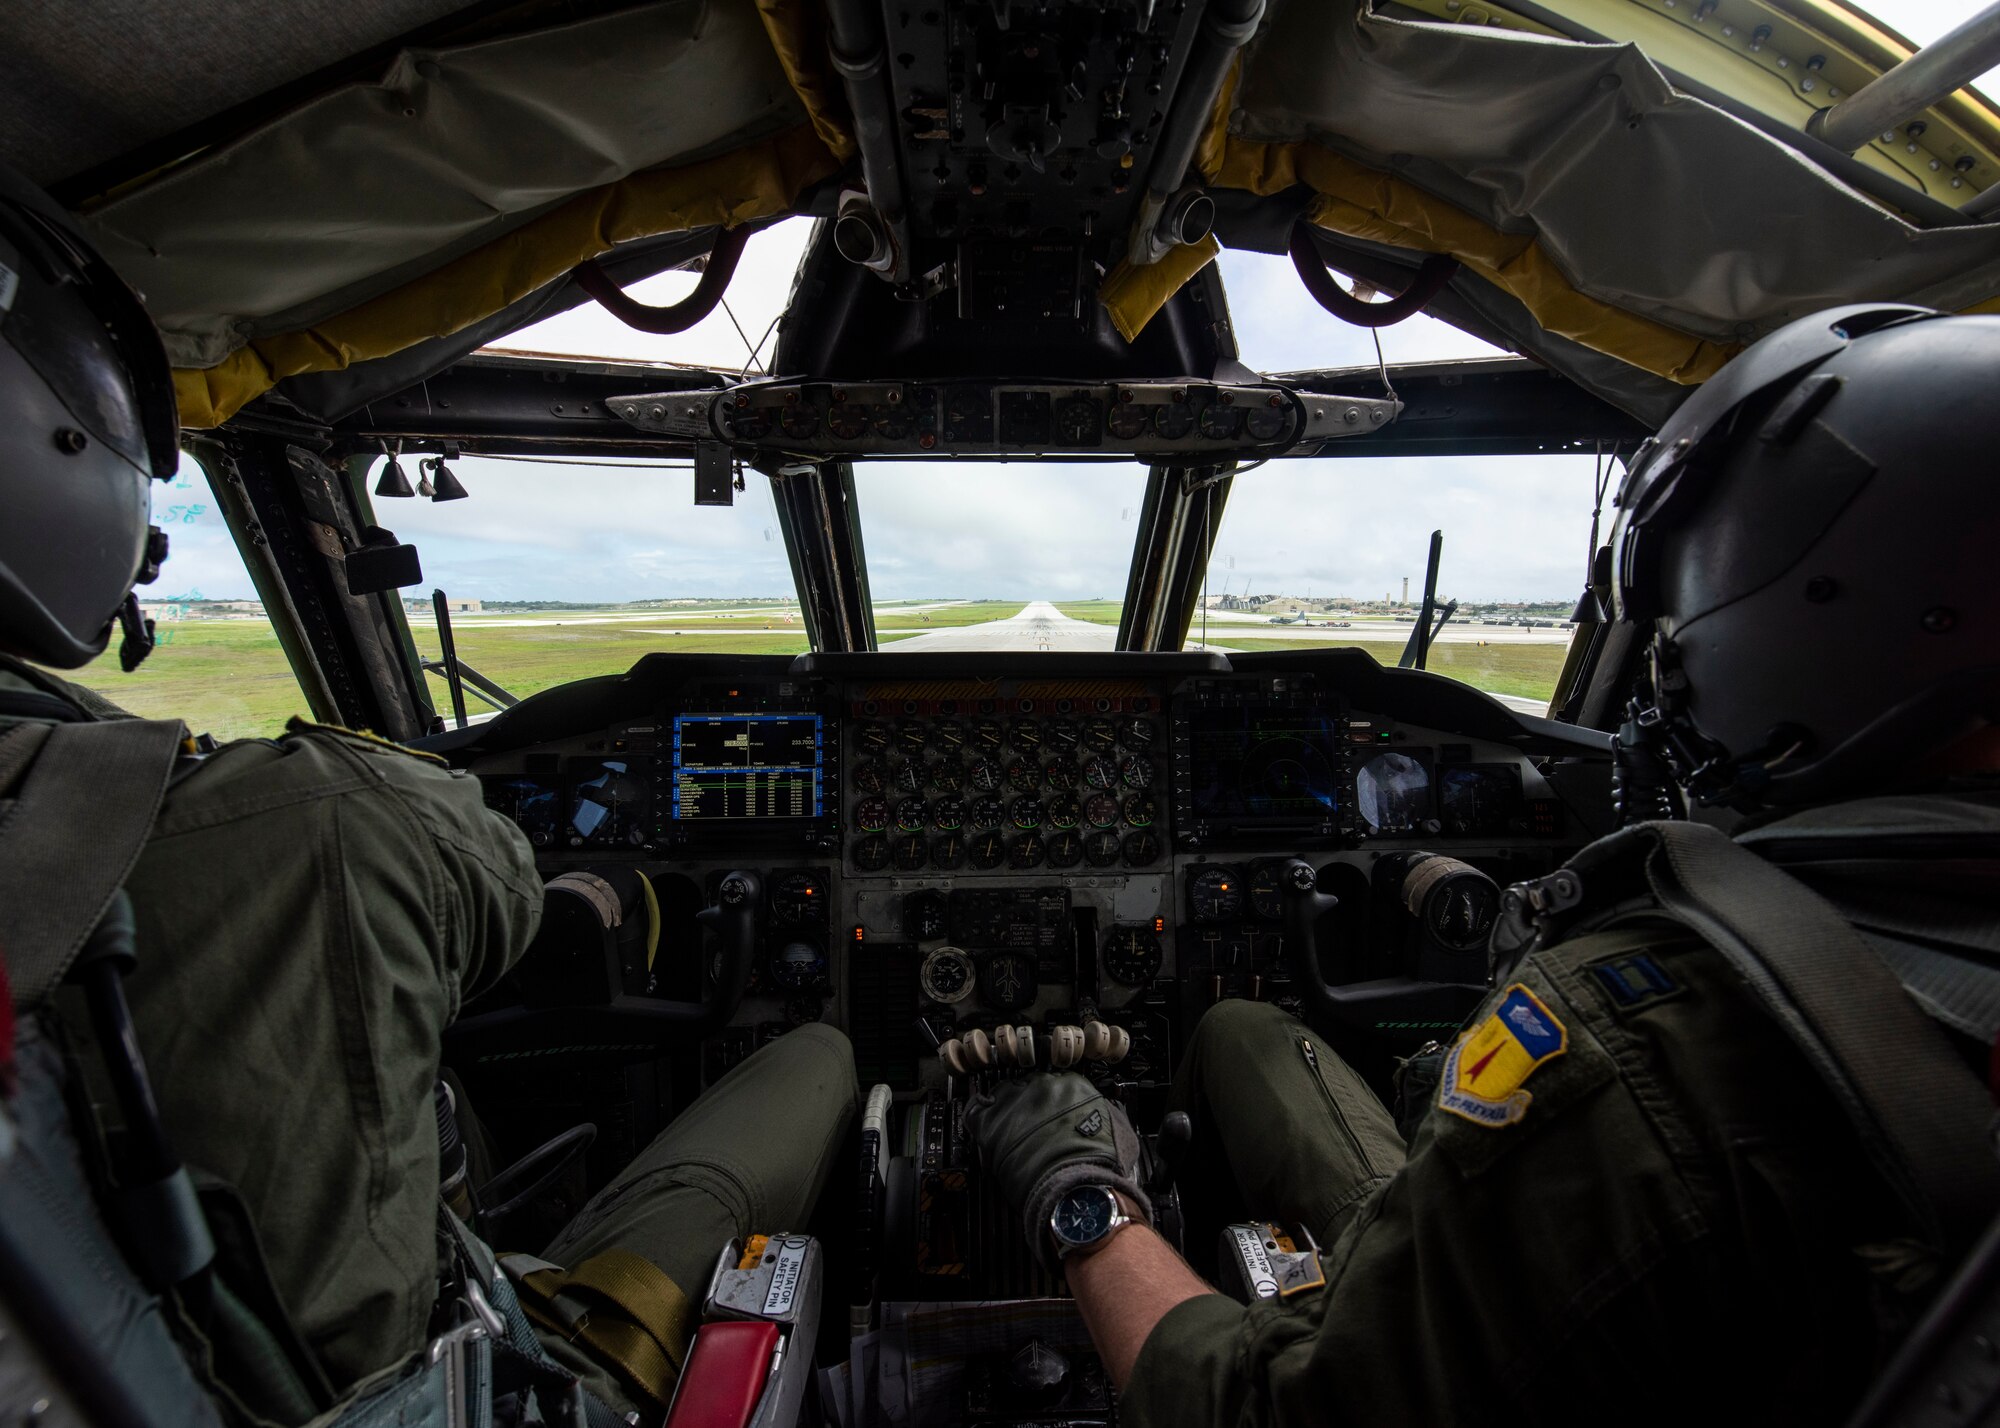 U.S. Air Force Capt. Wesley Fite, a 5th Operation Support Squadron pilot attached to the 69th Expeditionary Bomb Squadron, deployed from Minot Air Force Base, North Dakota, (left) and U.S. Air Force Capt. Patrick Mason, a pilot with the 69th Expeditionary Bomb Squadron (right), prepare for takeoff in a B-52H Stratofortress at Andersen Air Force Base, Guam, Feb. 3, 2020. U.S. Strategic Command has conducted bomber task force missions since 2014 as a demonstration of the U.S. commitment to collective security, and to integrate with Geographic Combatant Command operations. (U.S. Air Force photo by Senior Airman Zachary Neal)